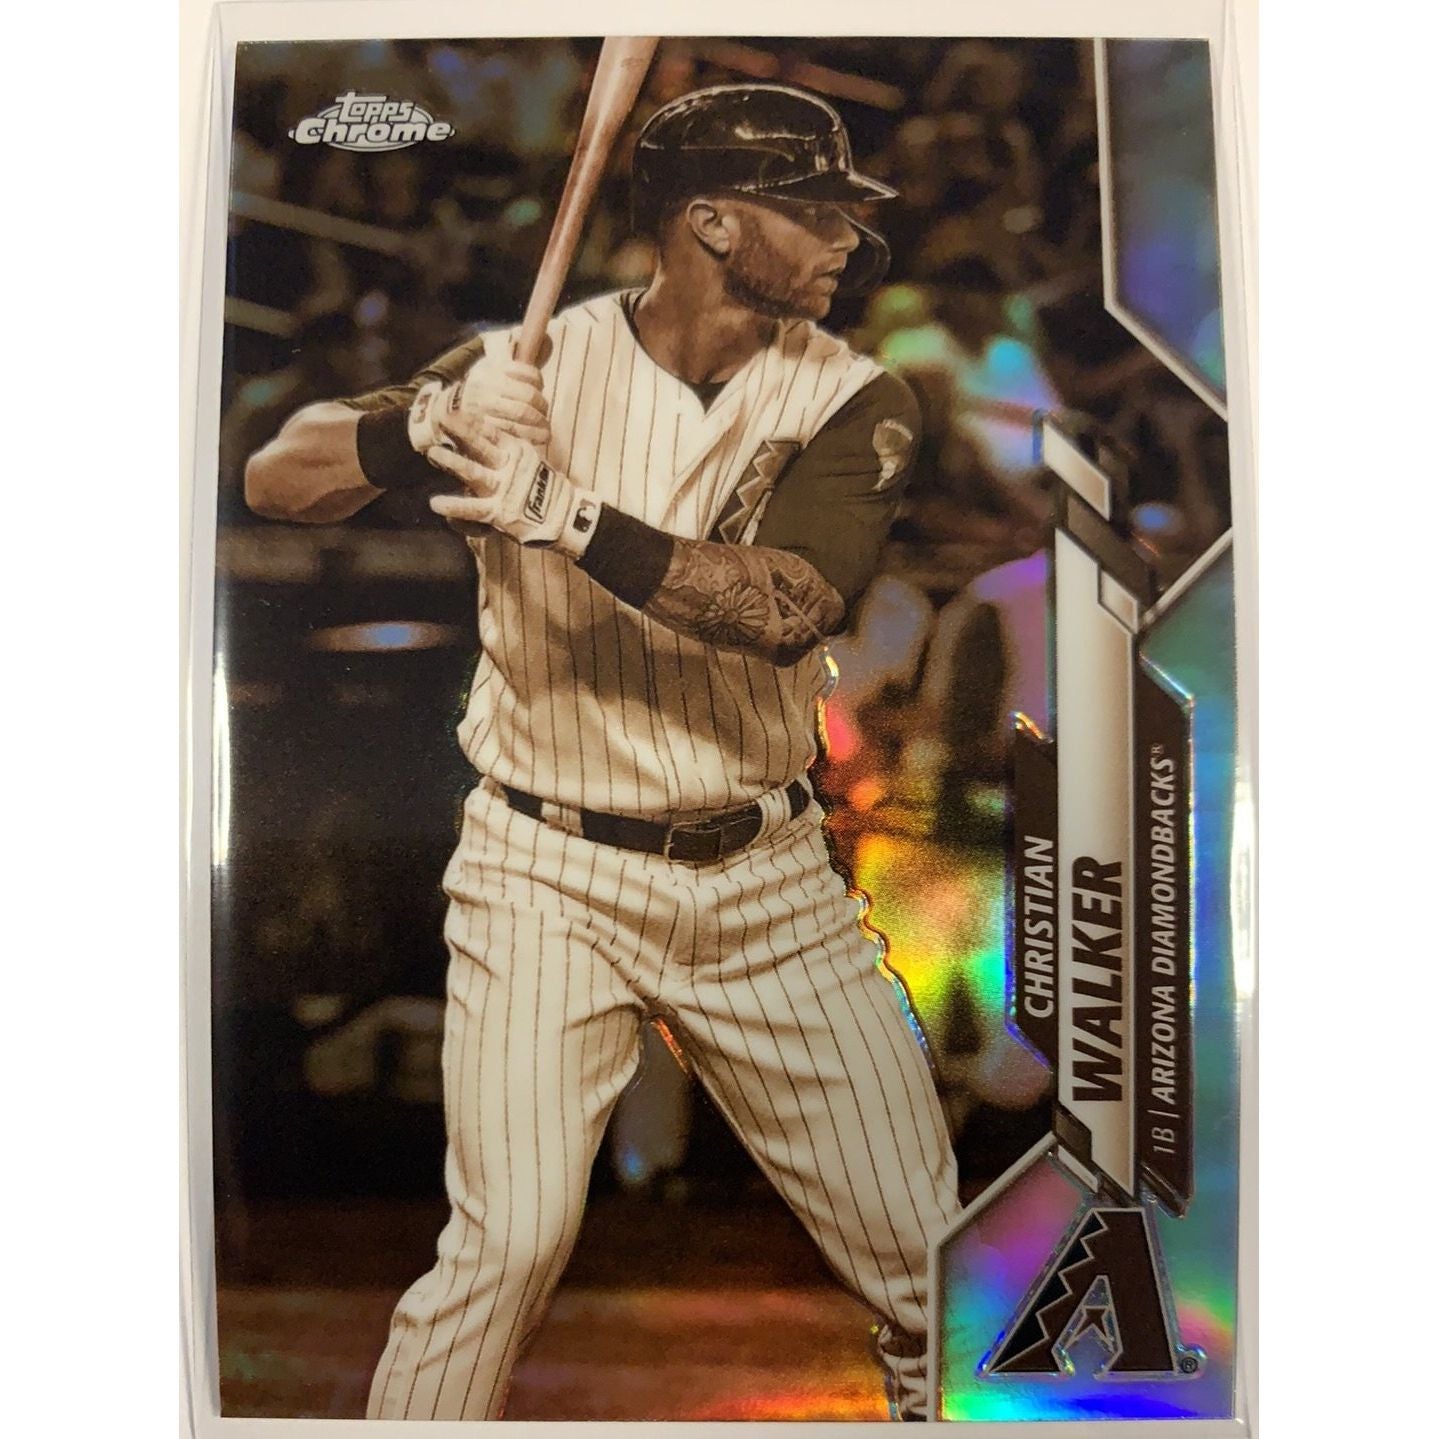  2020 Topps Chrome Christian Walker Sepia Refractor  Local Legends Cards & Collectibles